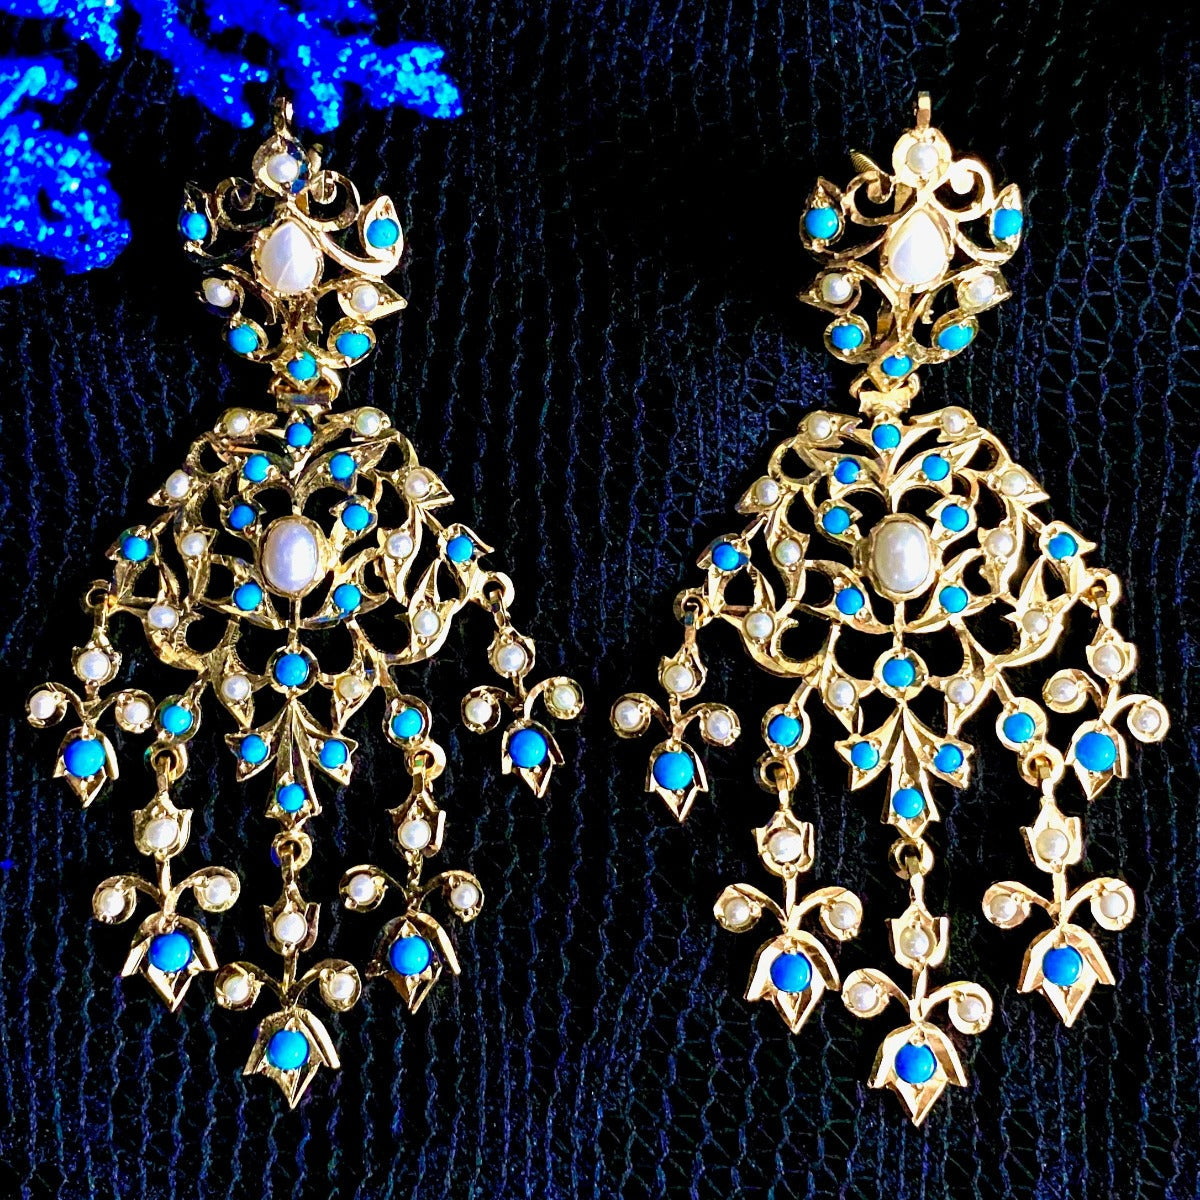 Edwardian Turquoise earrings | Premium Gold Plated Jewelry | For Women